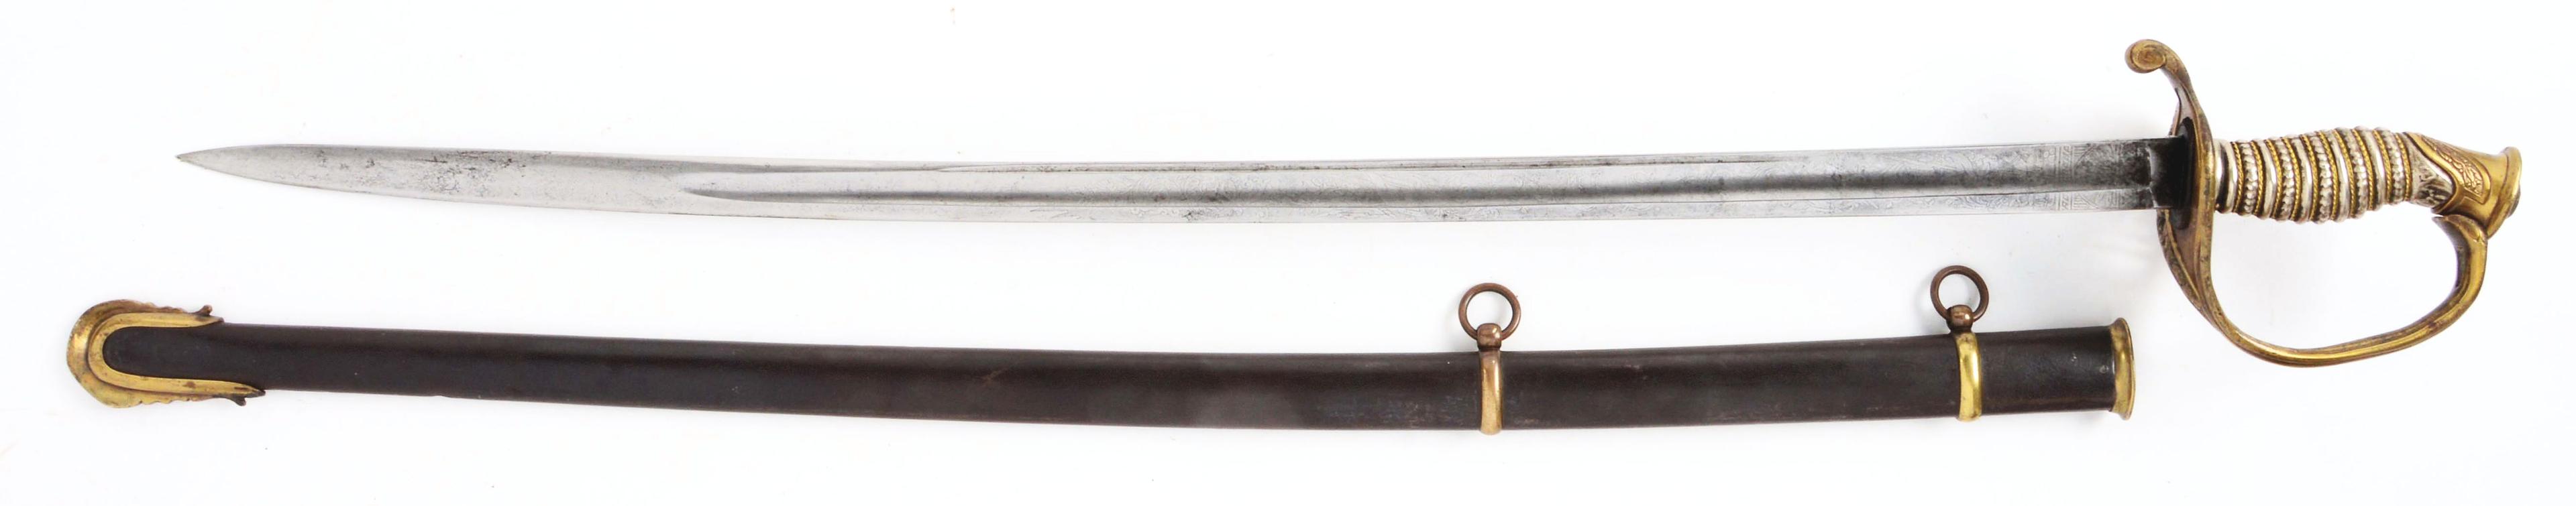 UNITED STATES 1850 STAFF AND FIELD OFFICER'S SWORD